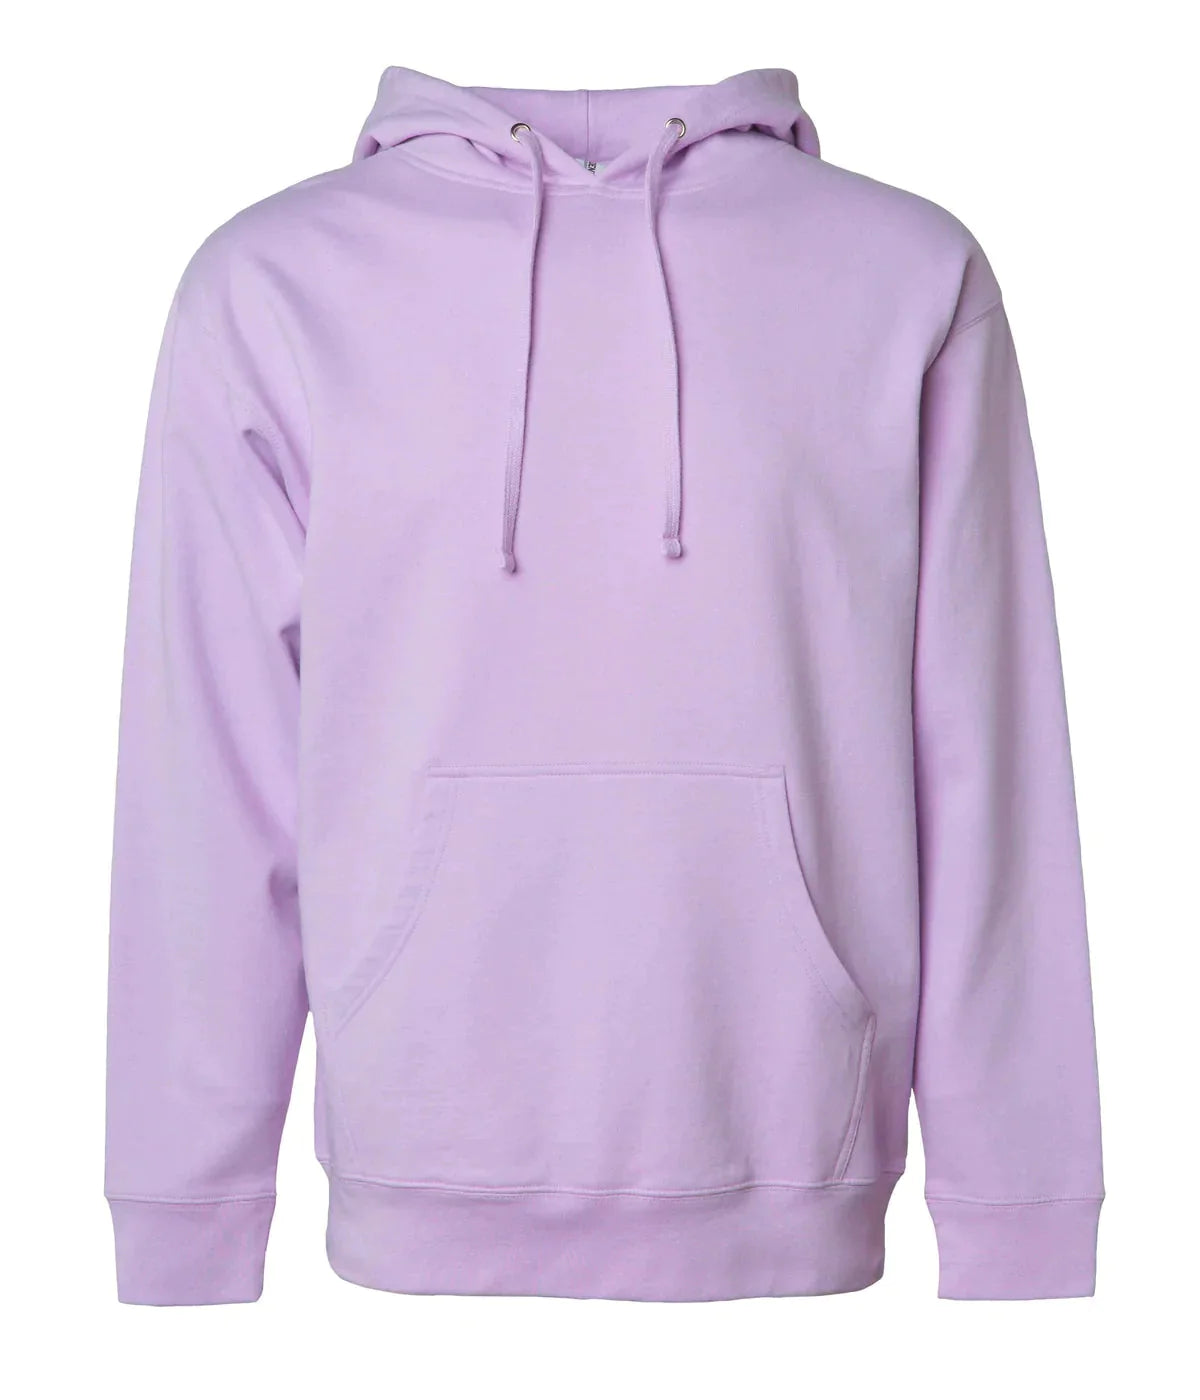 SS4500 Midweight Hooded Pullover Sweatshirt - Lavender / XS